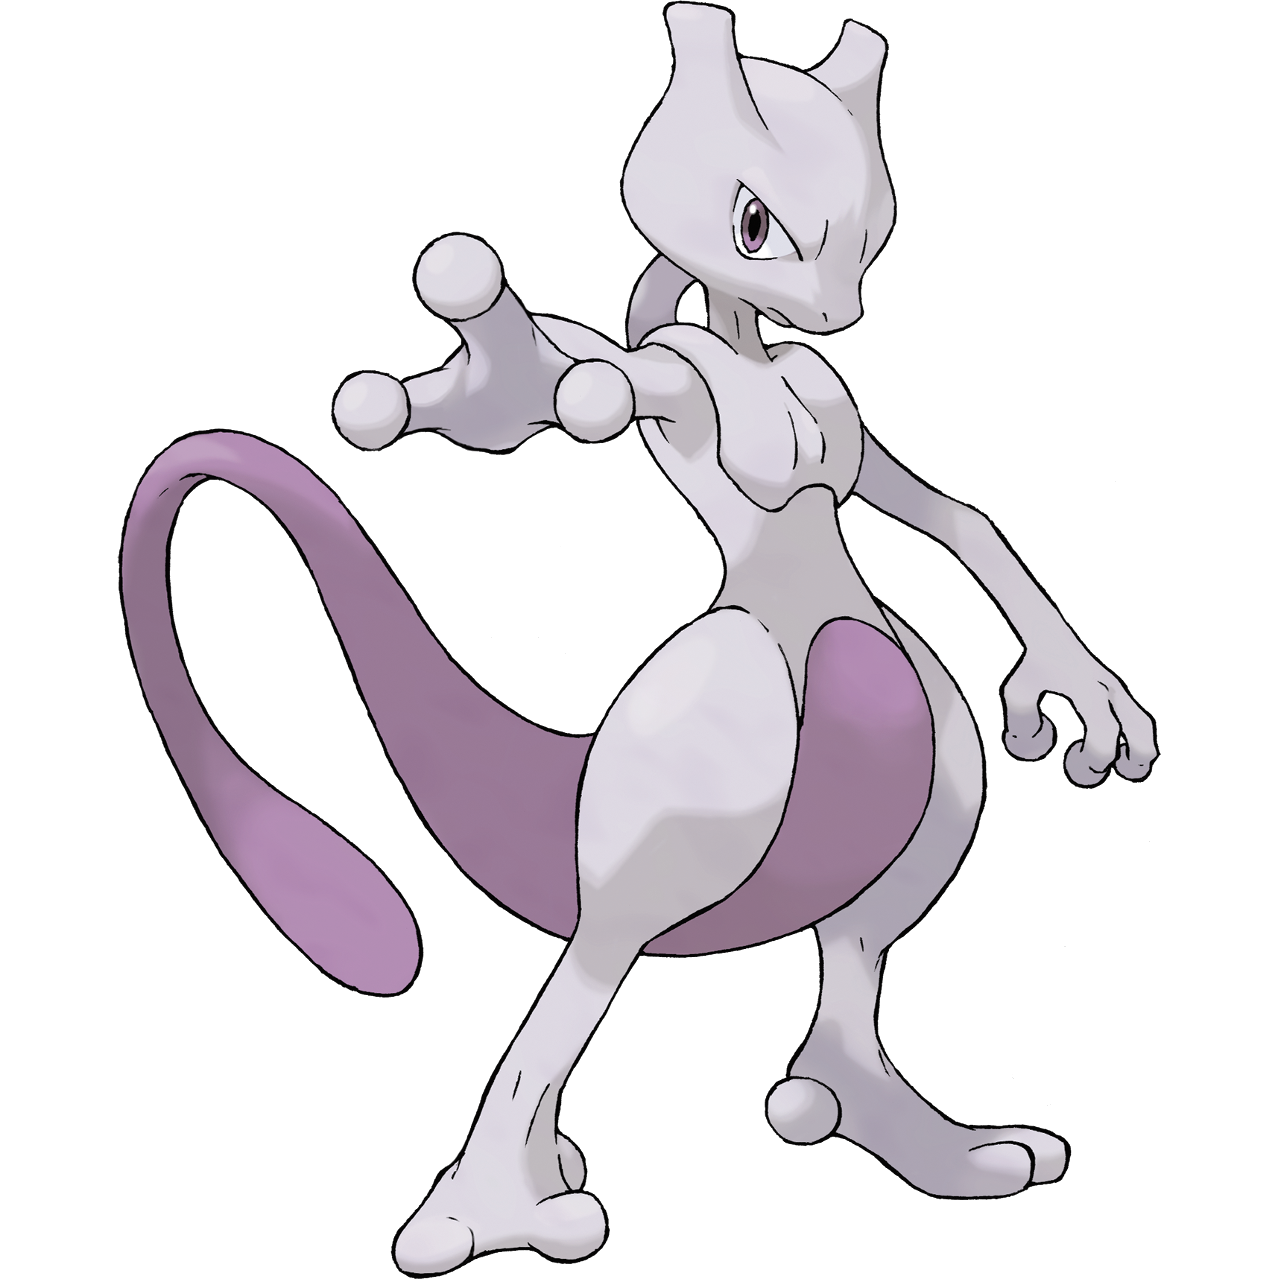 File:Mewtwo Apro319.png